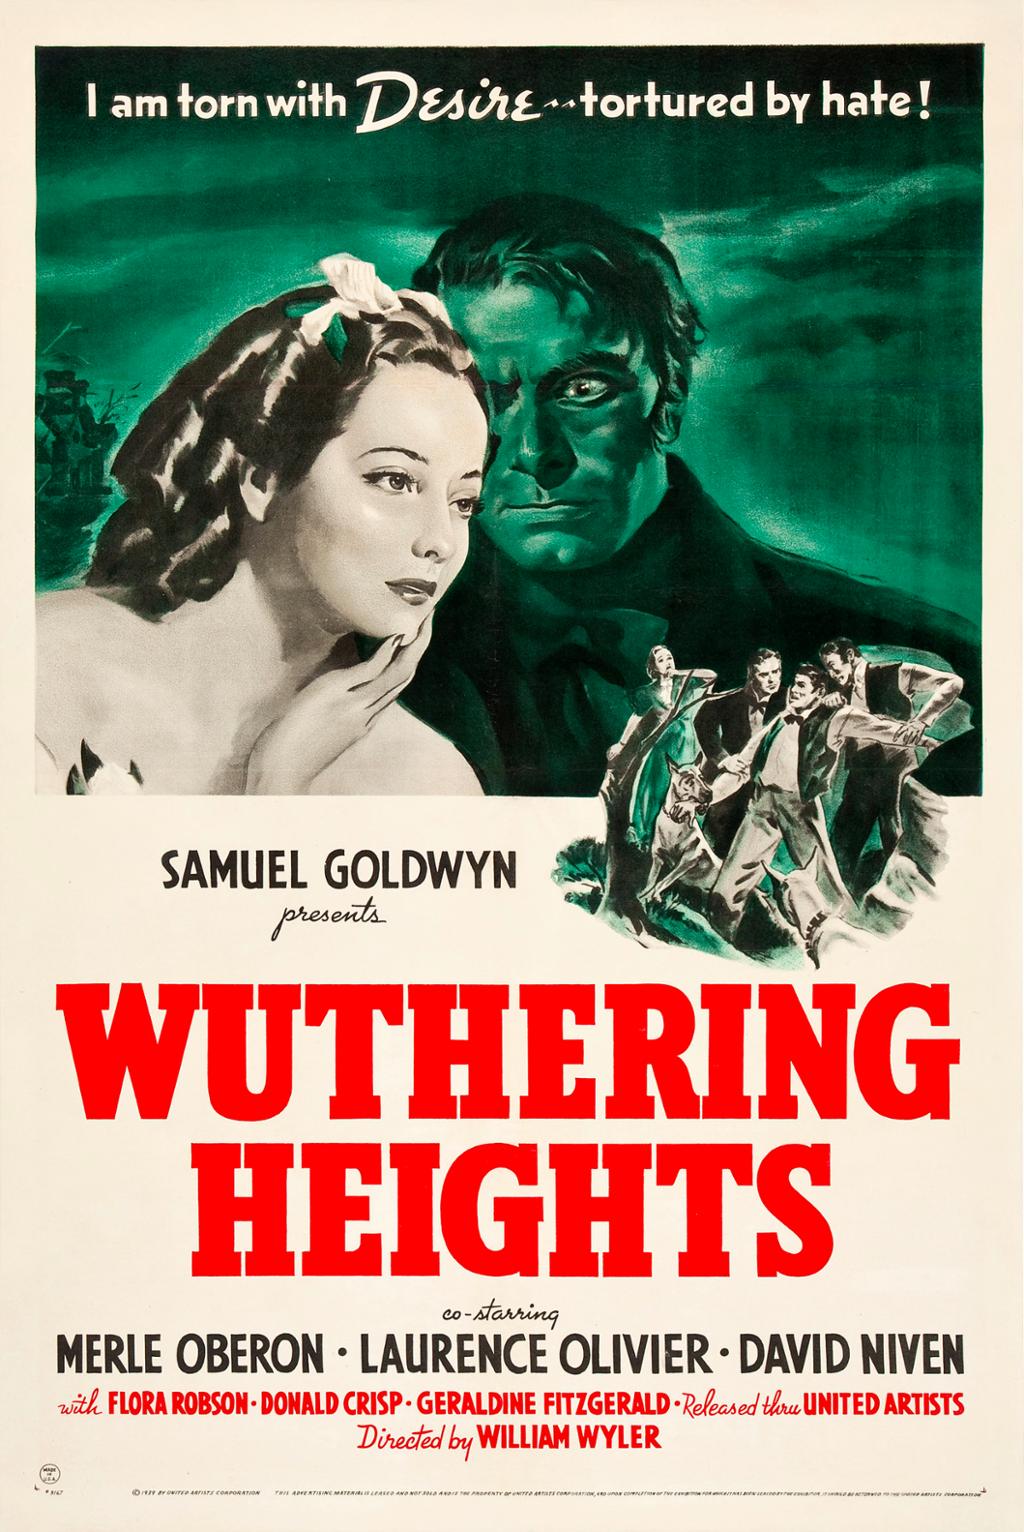 Movie Poster: Tag line "I am torn with desire, tortured by hate". There is a drawing of a man coloured in green, staring at a woman who has been coloured in white, in the corner is a smaller picture of what appears to be a fight, one man is restrained by other men. 